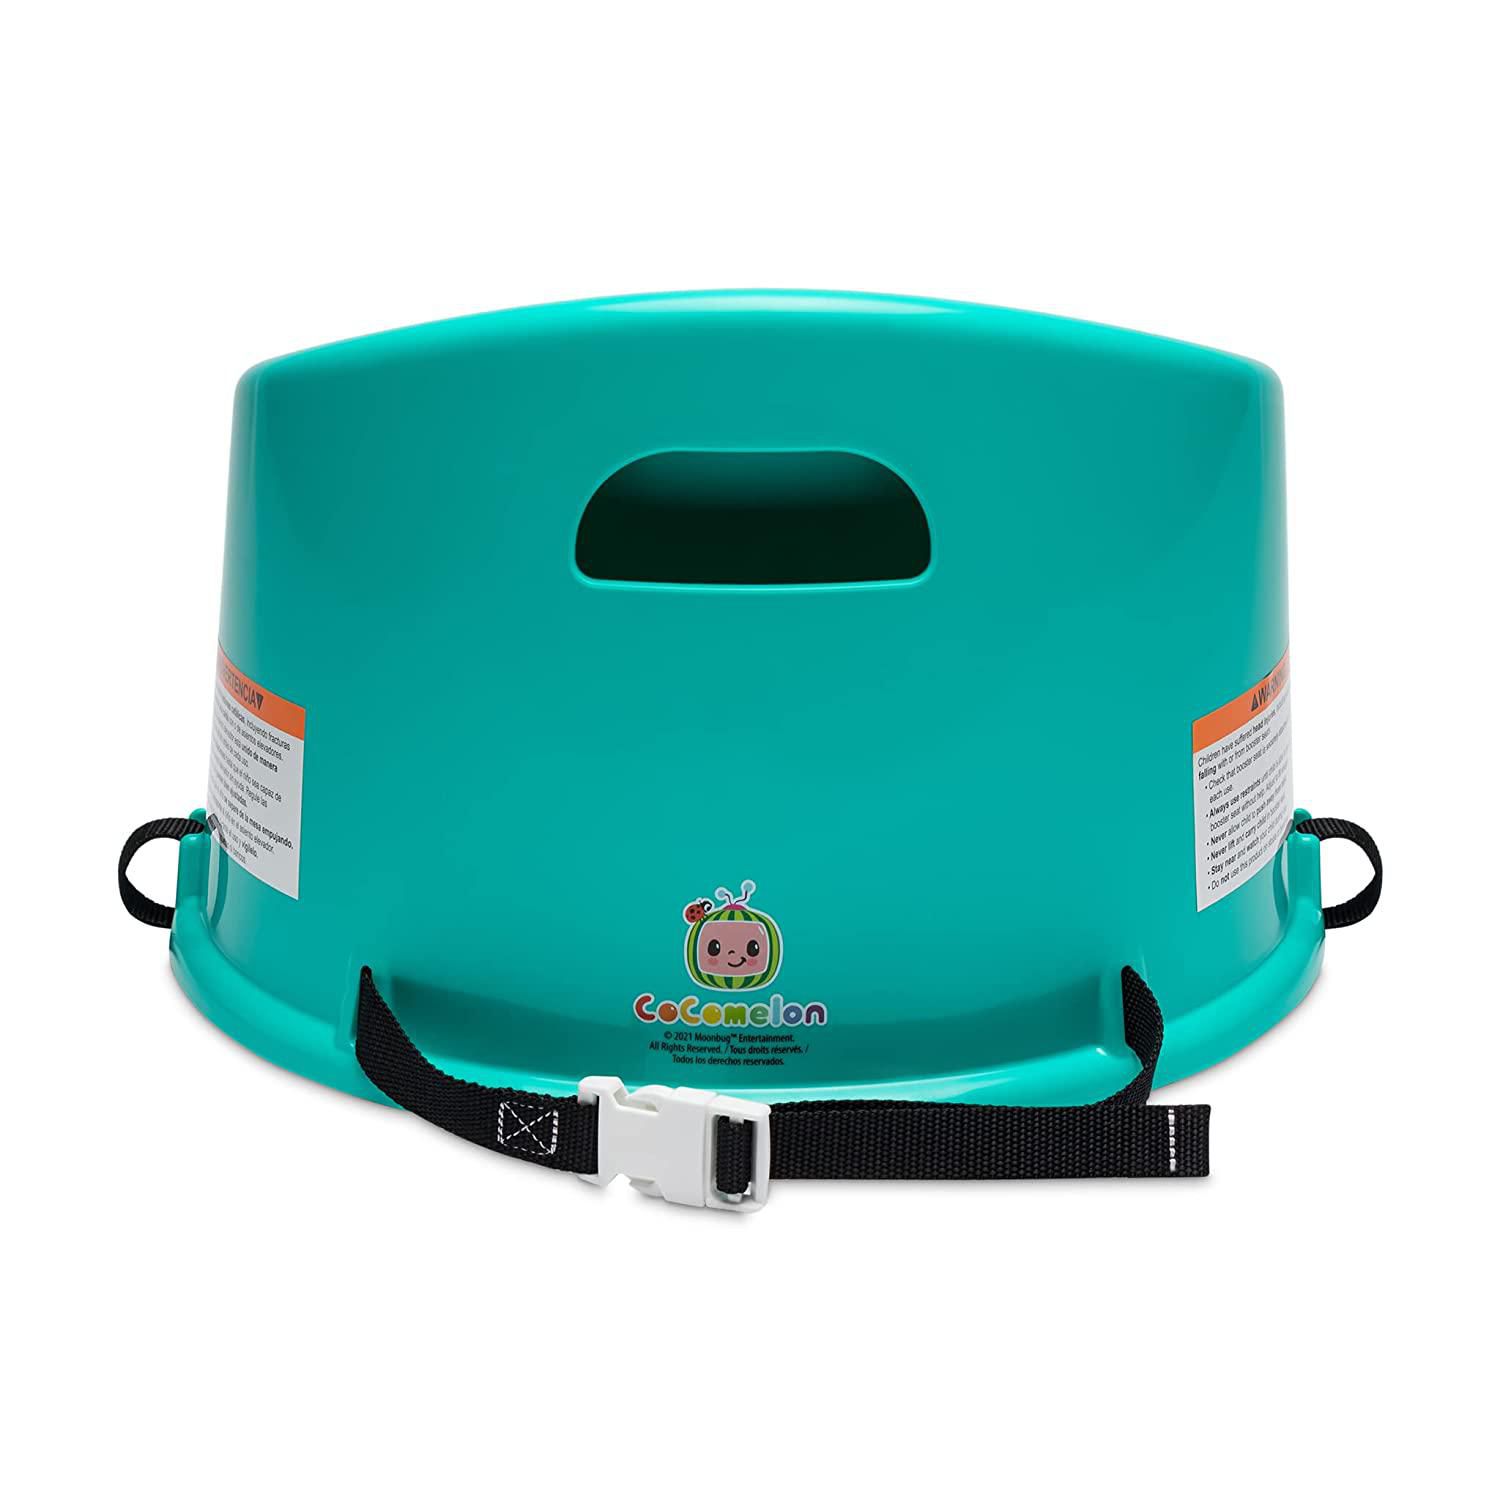 Cocomelon™ Toddler Booster Seat Green, Your childs favorite Cocomelon™  characters